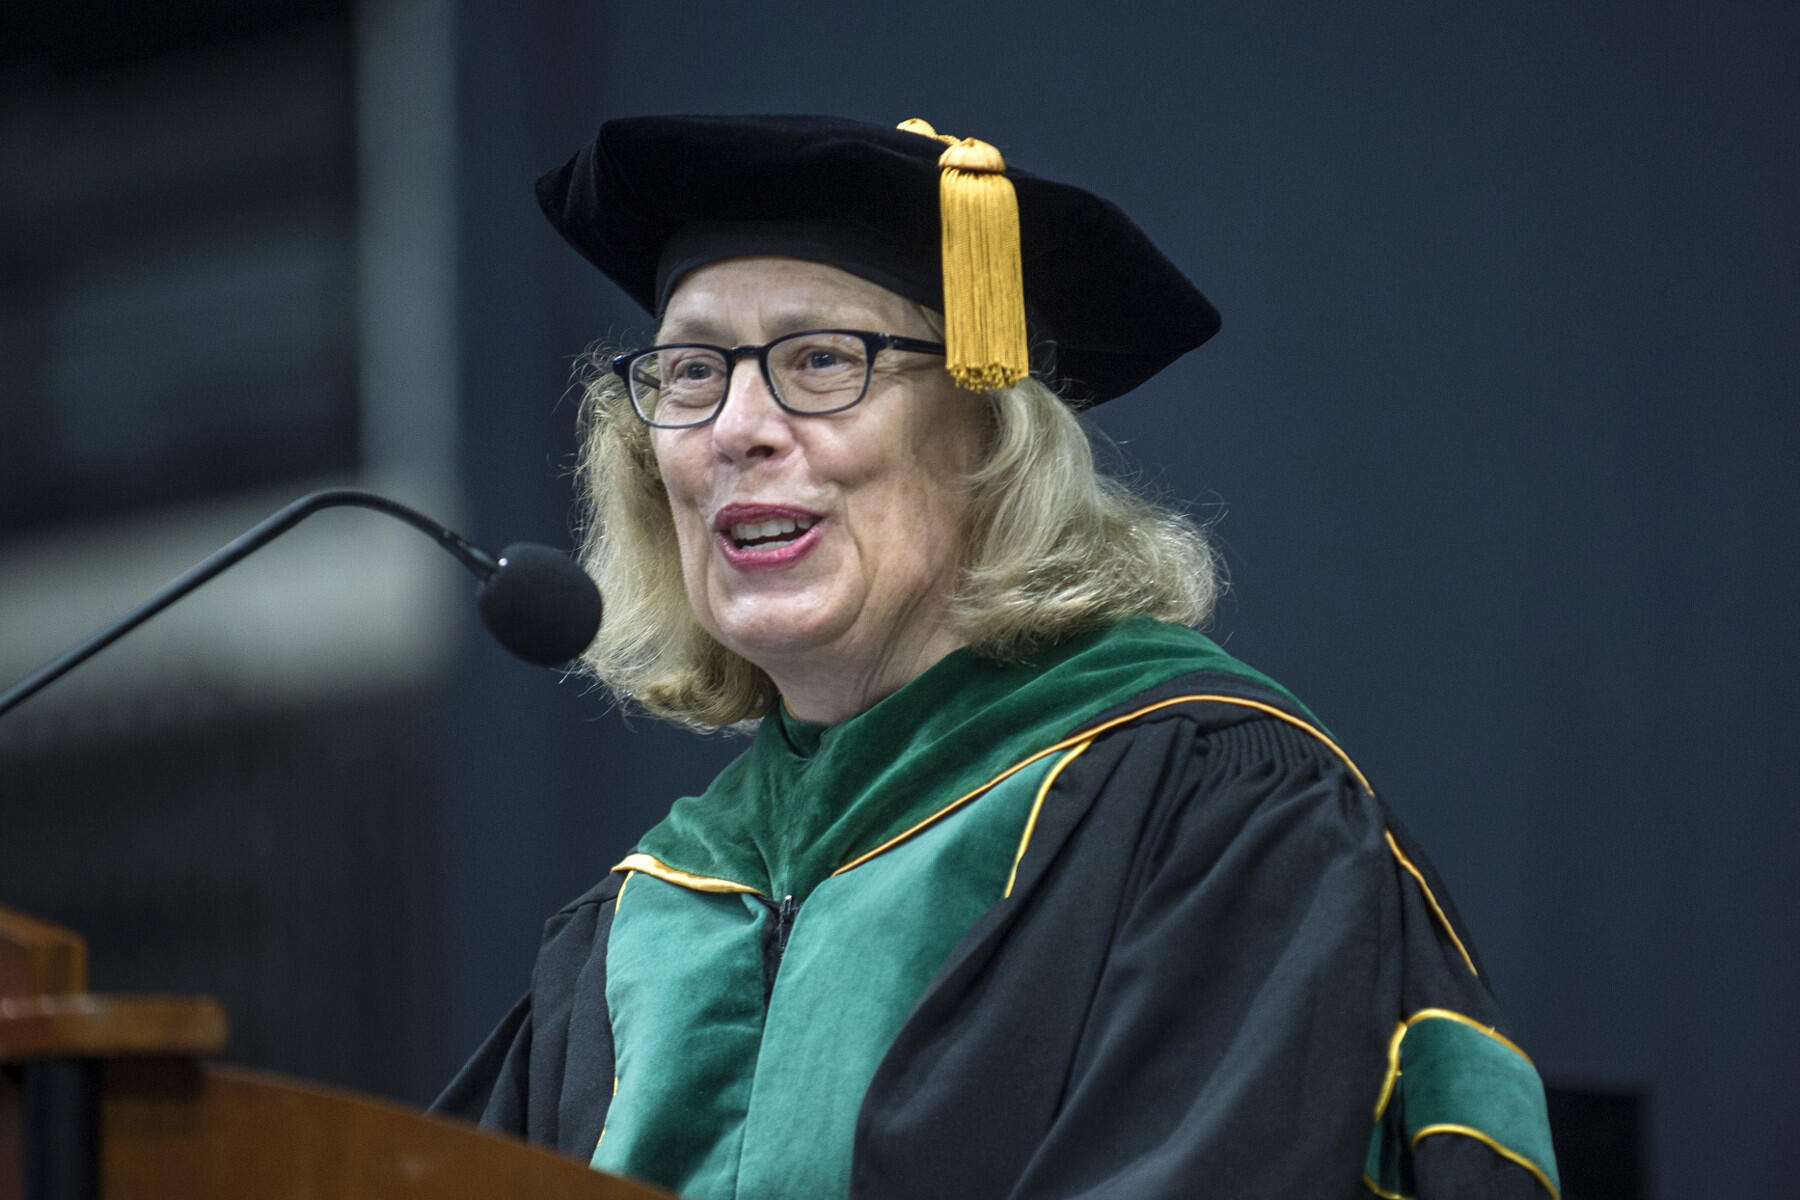 Claire Pomeroy, M.D., is an advocate for patients and public health. At the VCU School of Medicine Hooding Ceremony on May 11, she encouraged the audience of graduating medical students to apply their education toward serving humanity. "Use your knowledge to benefit others," Pomeroy said. "Put patients’ needs above your own and embrace the value of altruism." (Photo by Kevin Morley, University Relations)